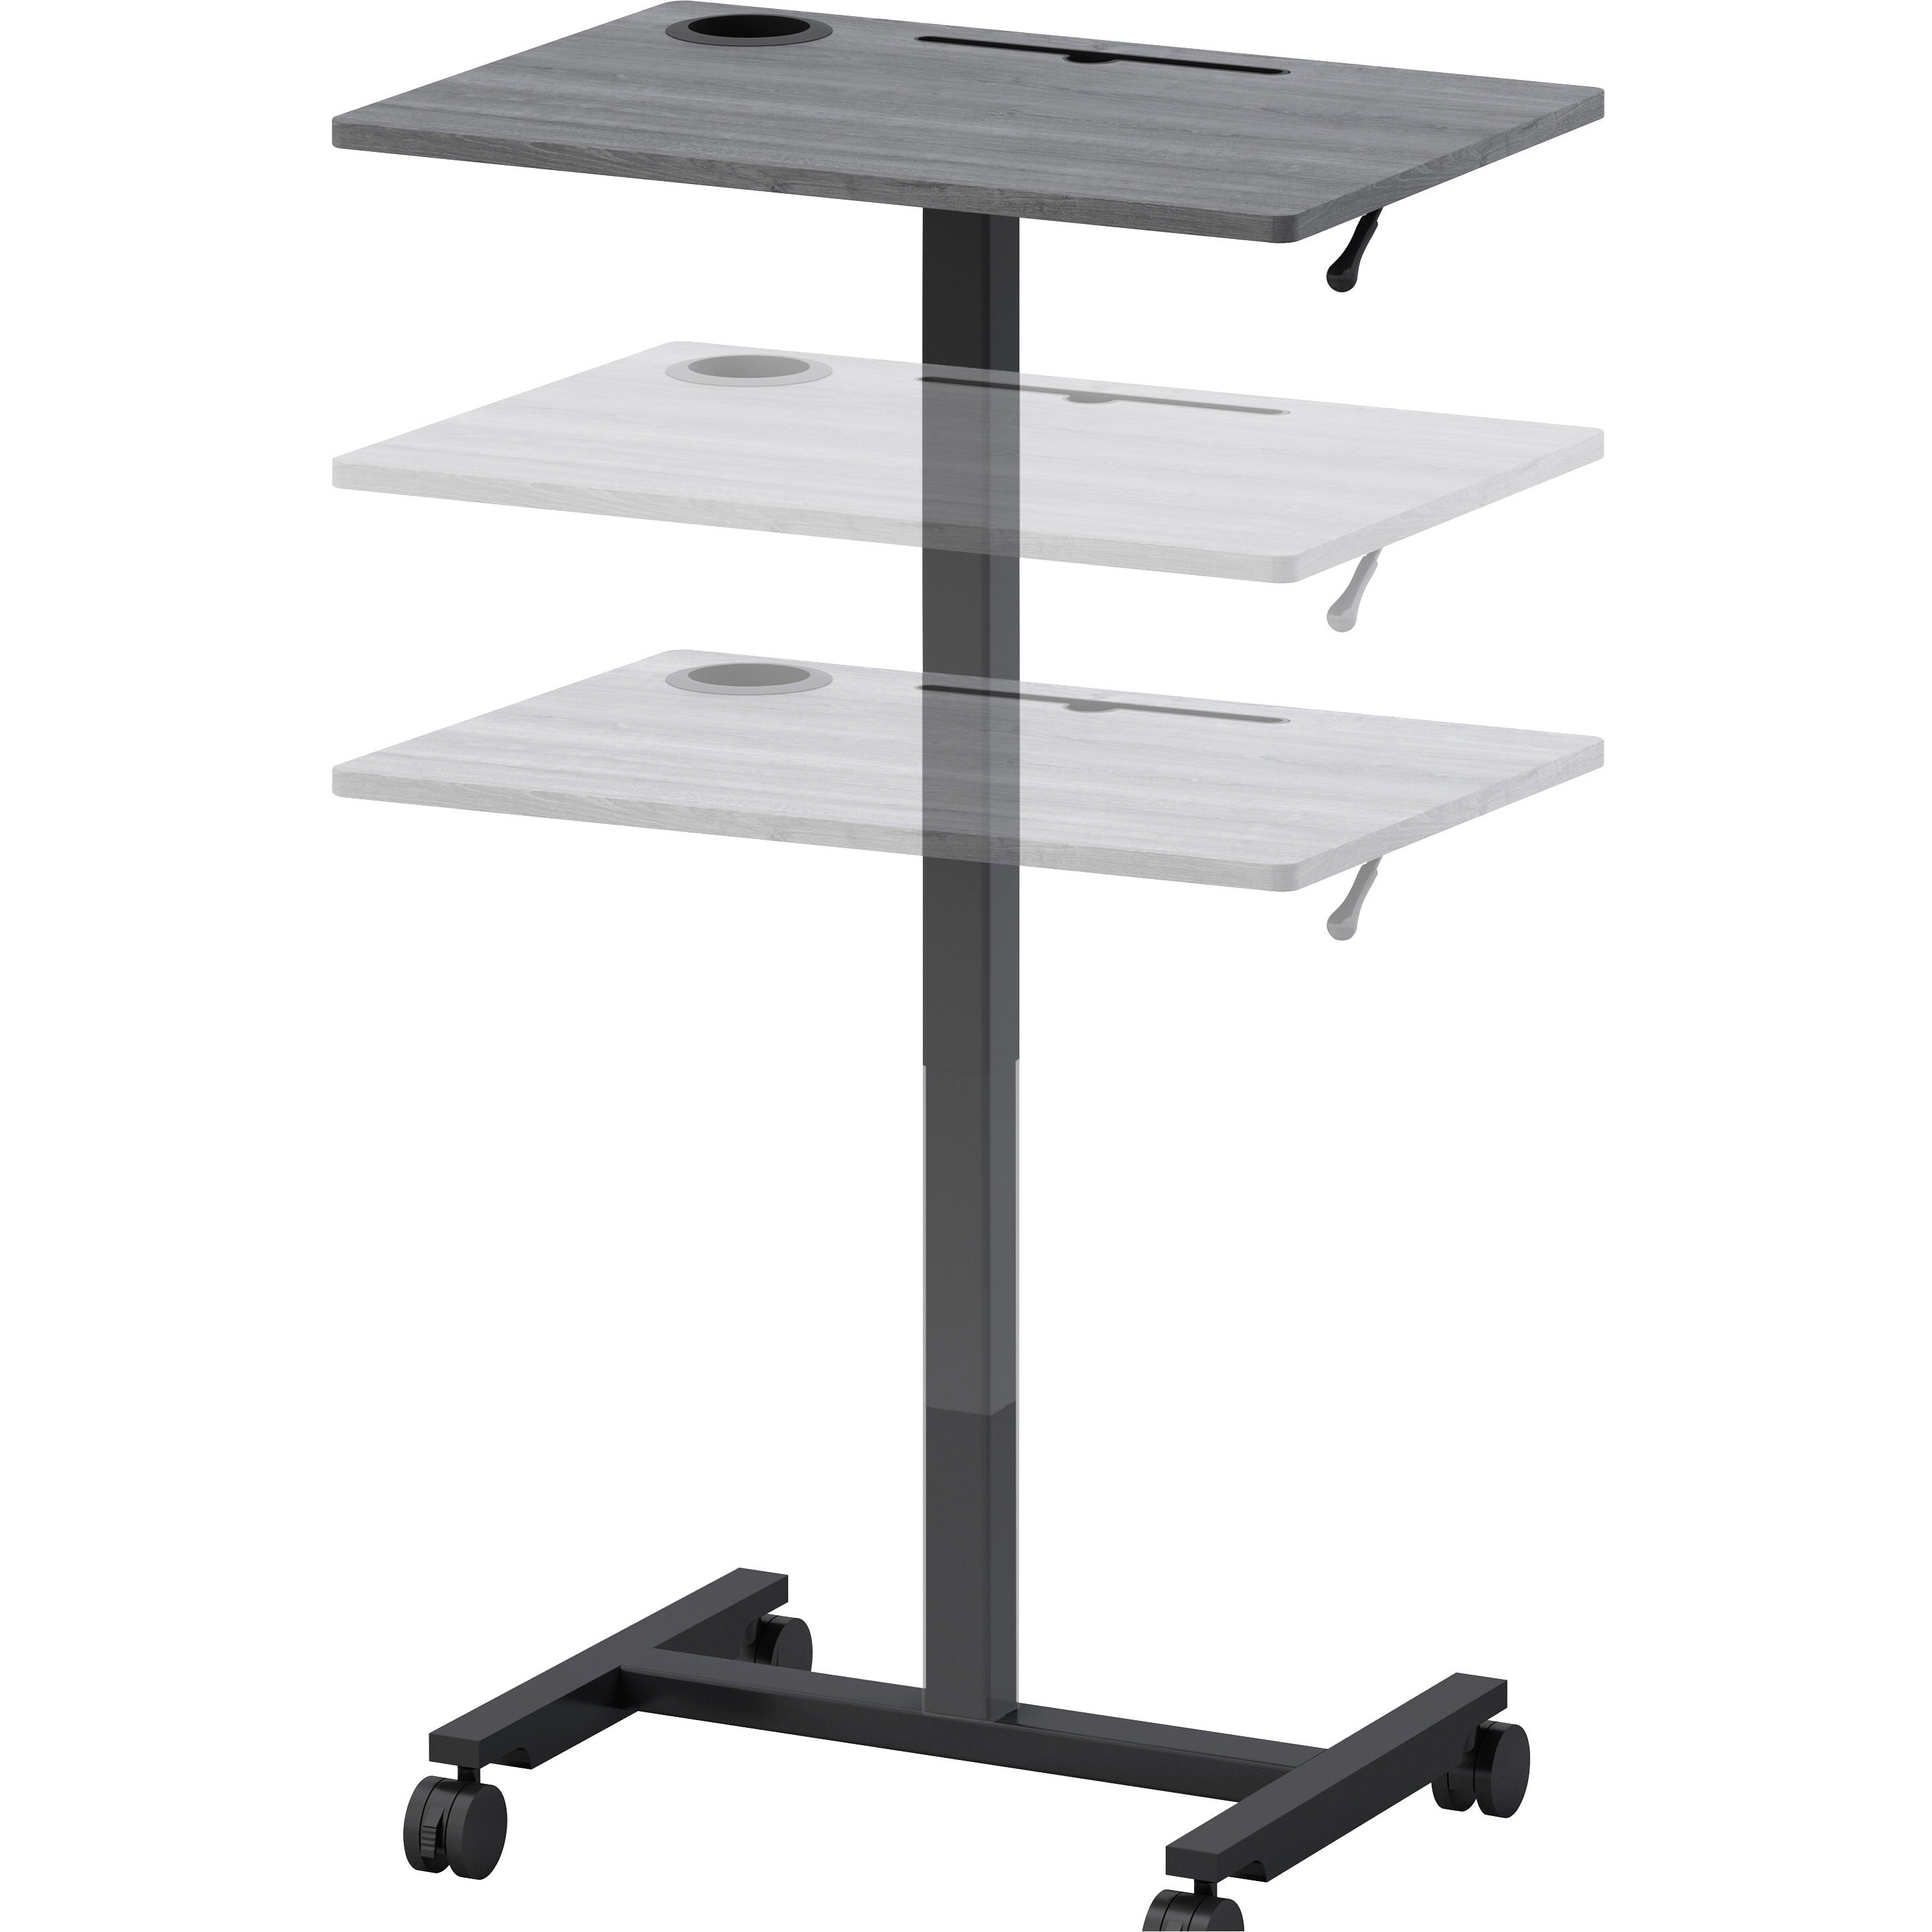 lorell-height-adjustable-mobile-desk-for-table-topweathered-charcoal-laminate-top-powder-coated-base-adjustable-height-30-to-4363-adjustment-43-height-x-2663-width-x-1913-depth-assembly-required-1-each_llr84837 - 1